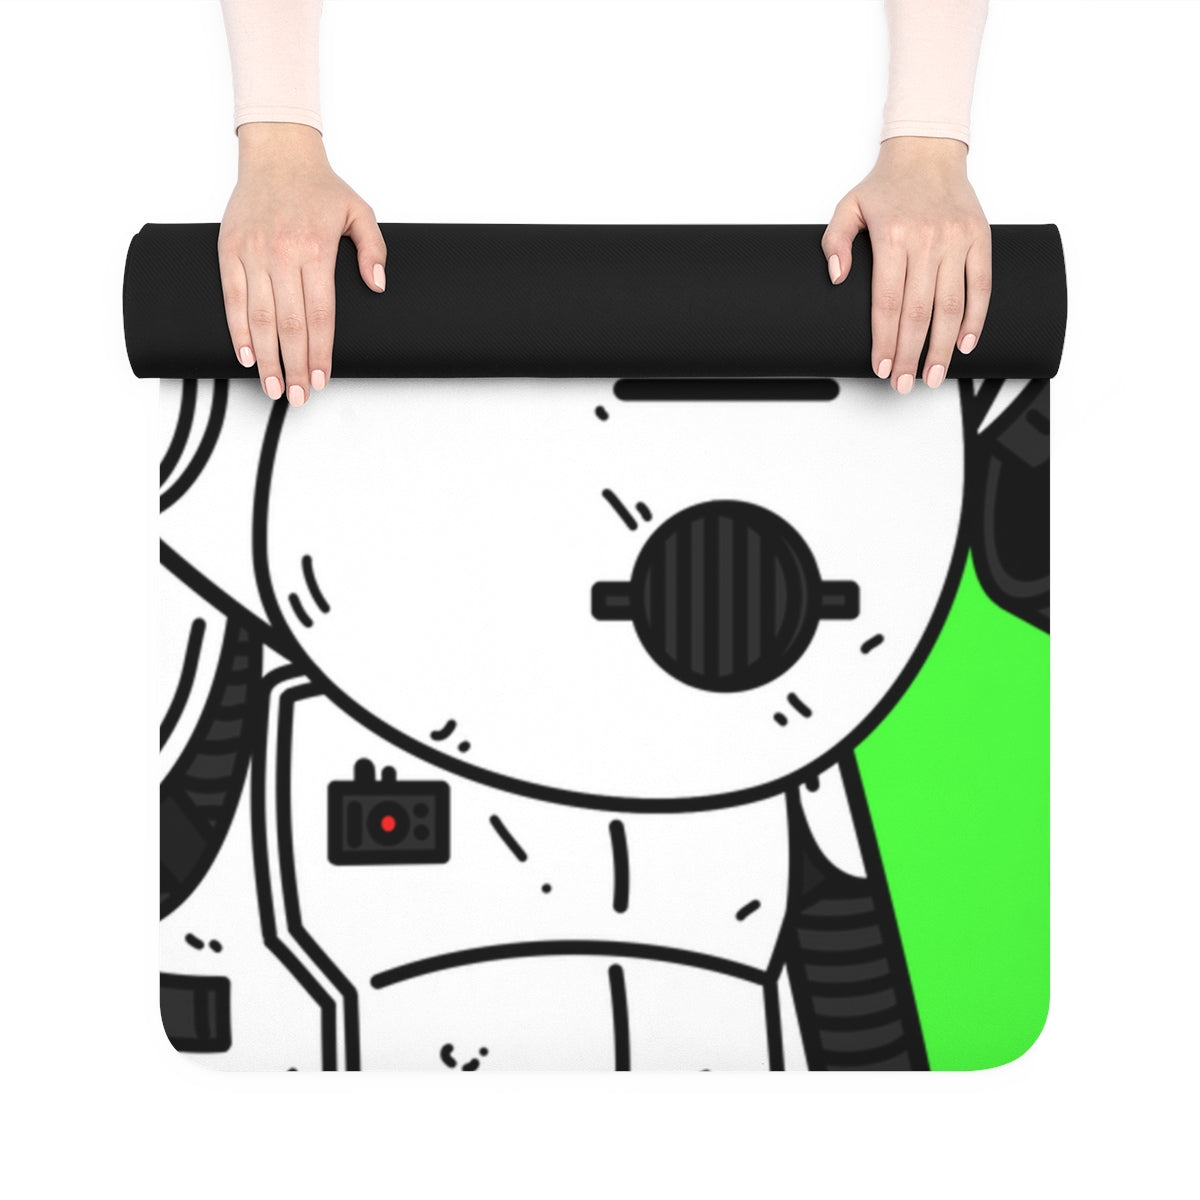 The LOL Visitor Rubber Yoga Mat